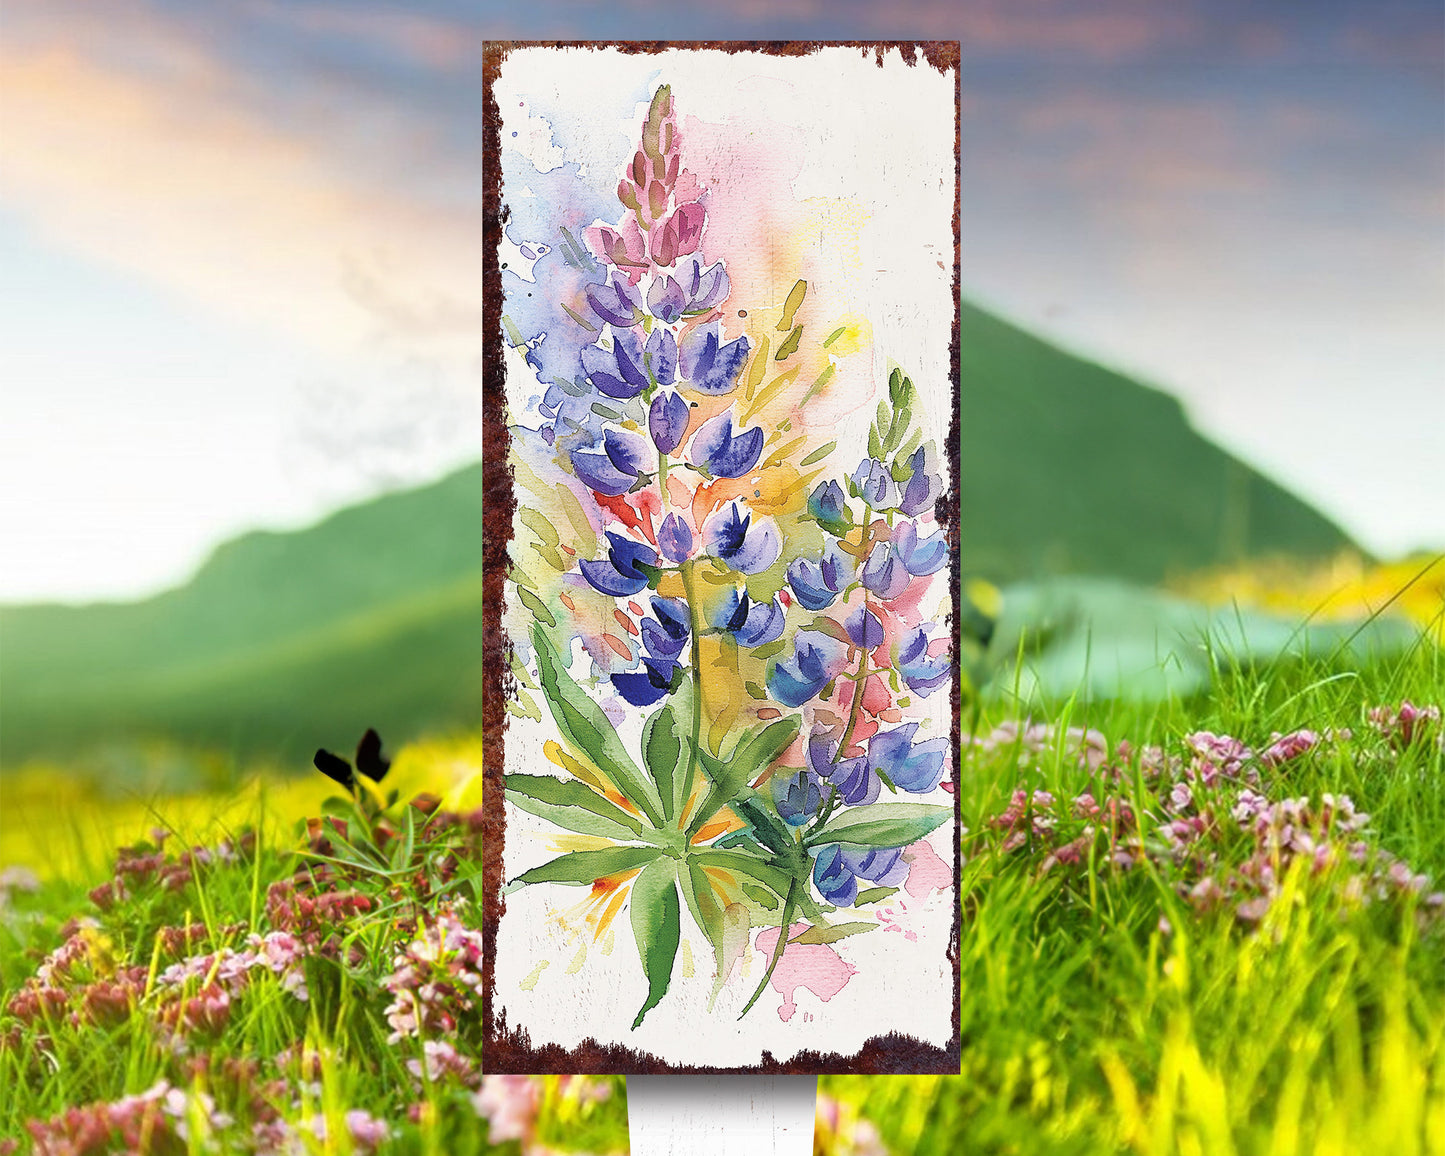 26in Spring Garden Stake | Watercolor Lupine Floral Decor | Perfect for Outdoor Decor, Yard Art, Garden Decorations